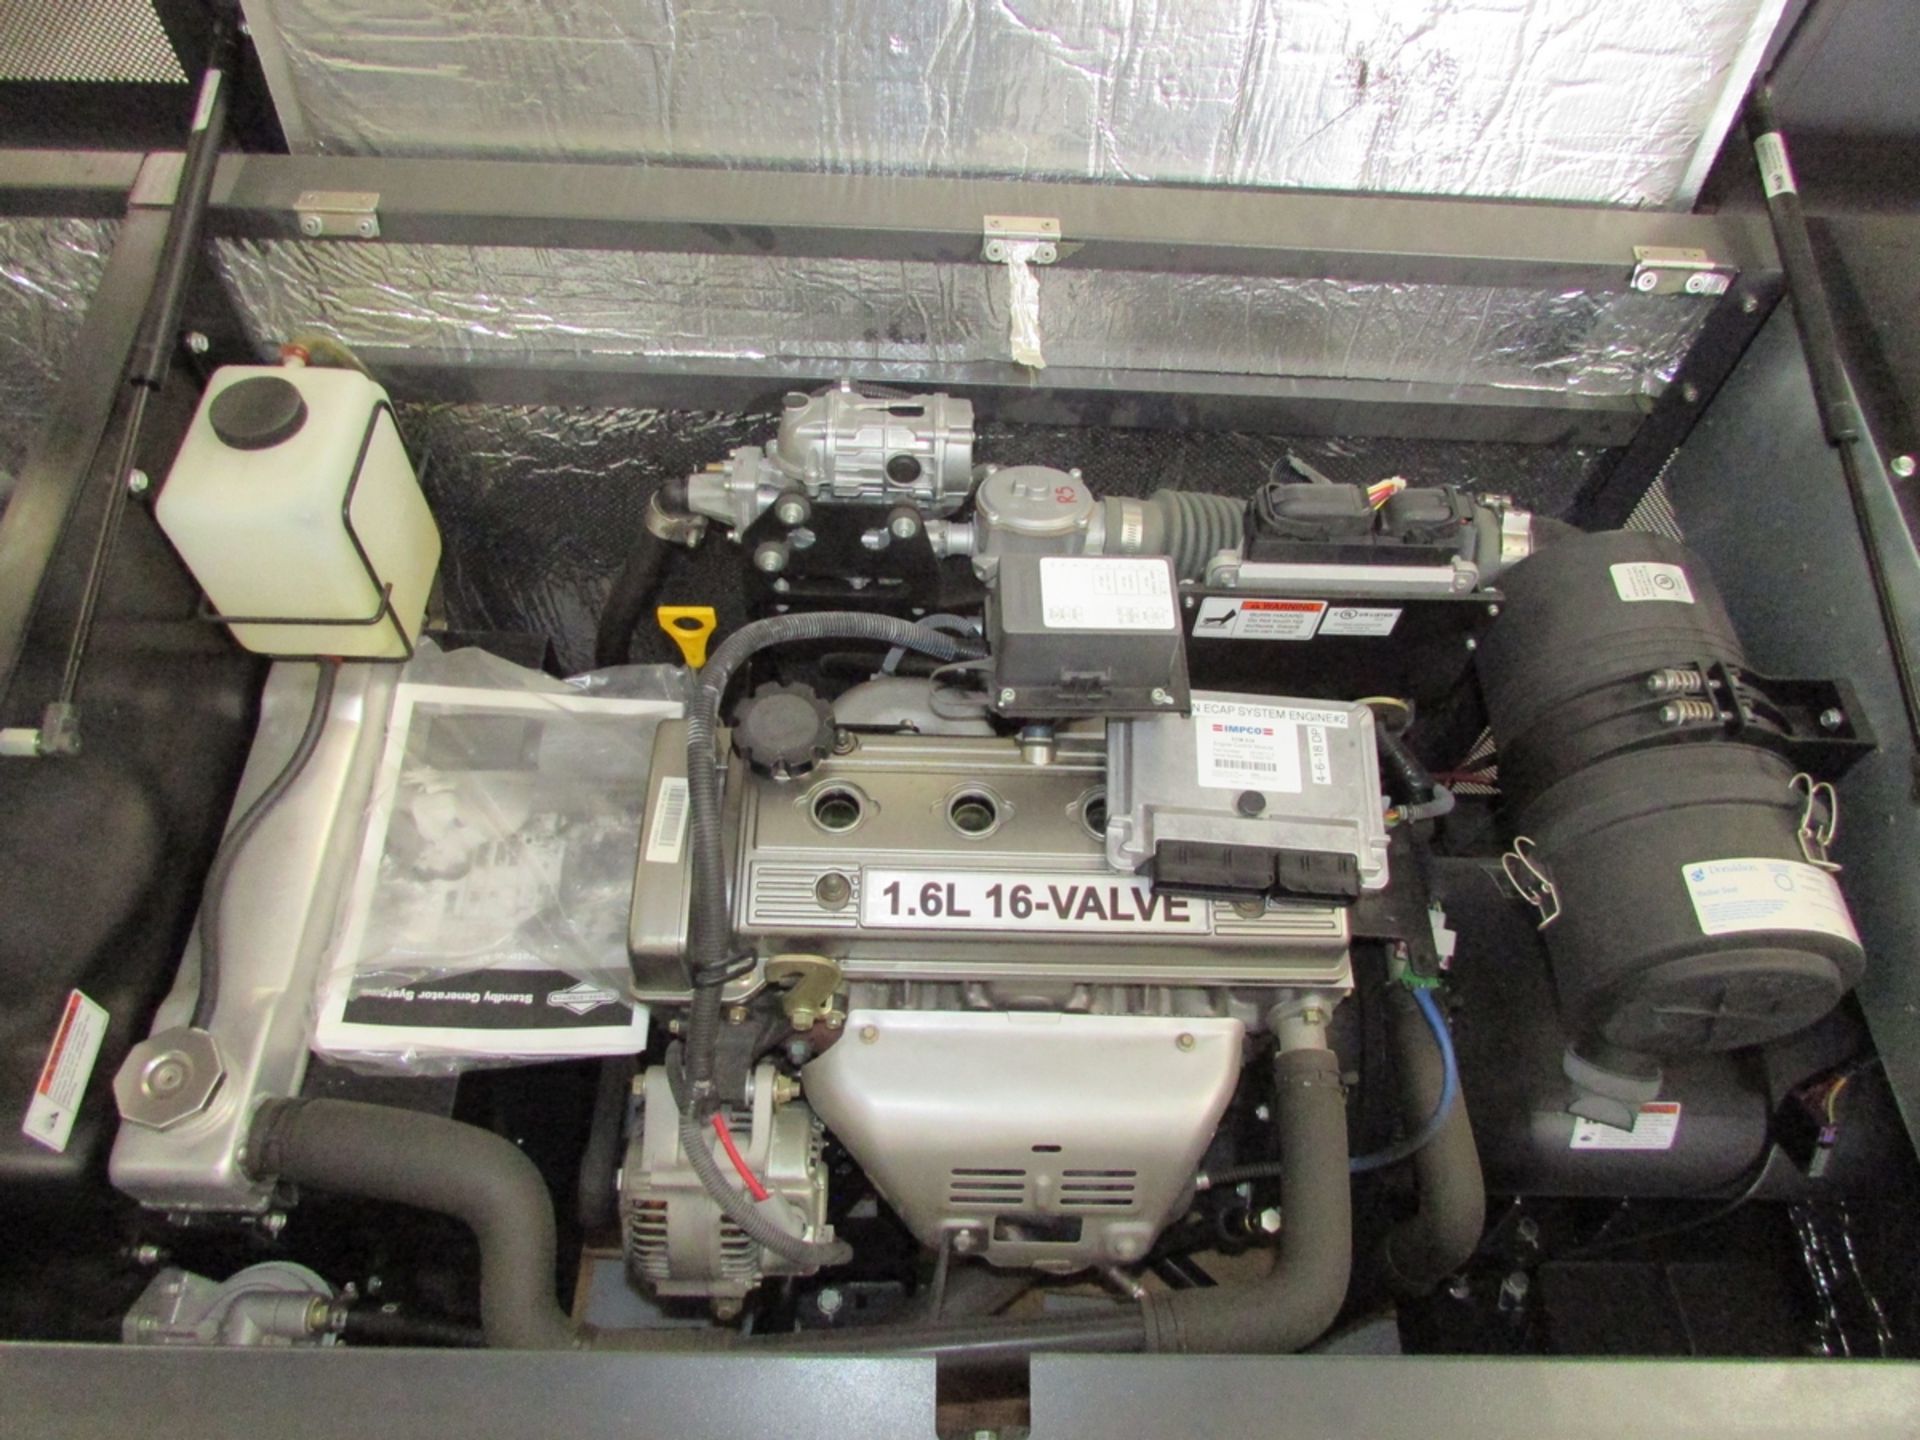 Briggs & Stratton 25-BSPP2-0 25Kw CNG/LPG Standby Generator (2013) - Image 8 of 36